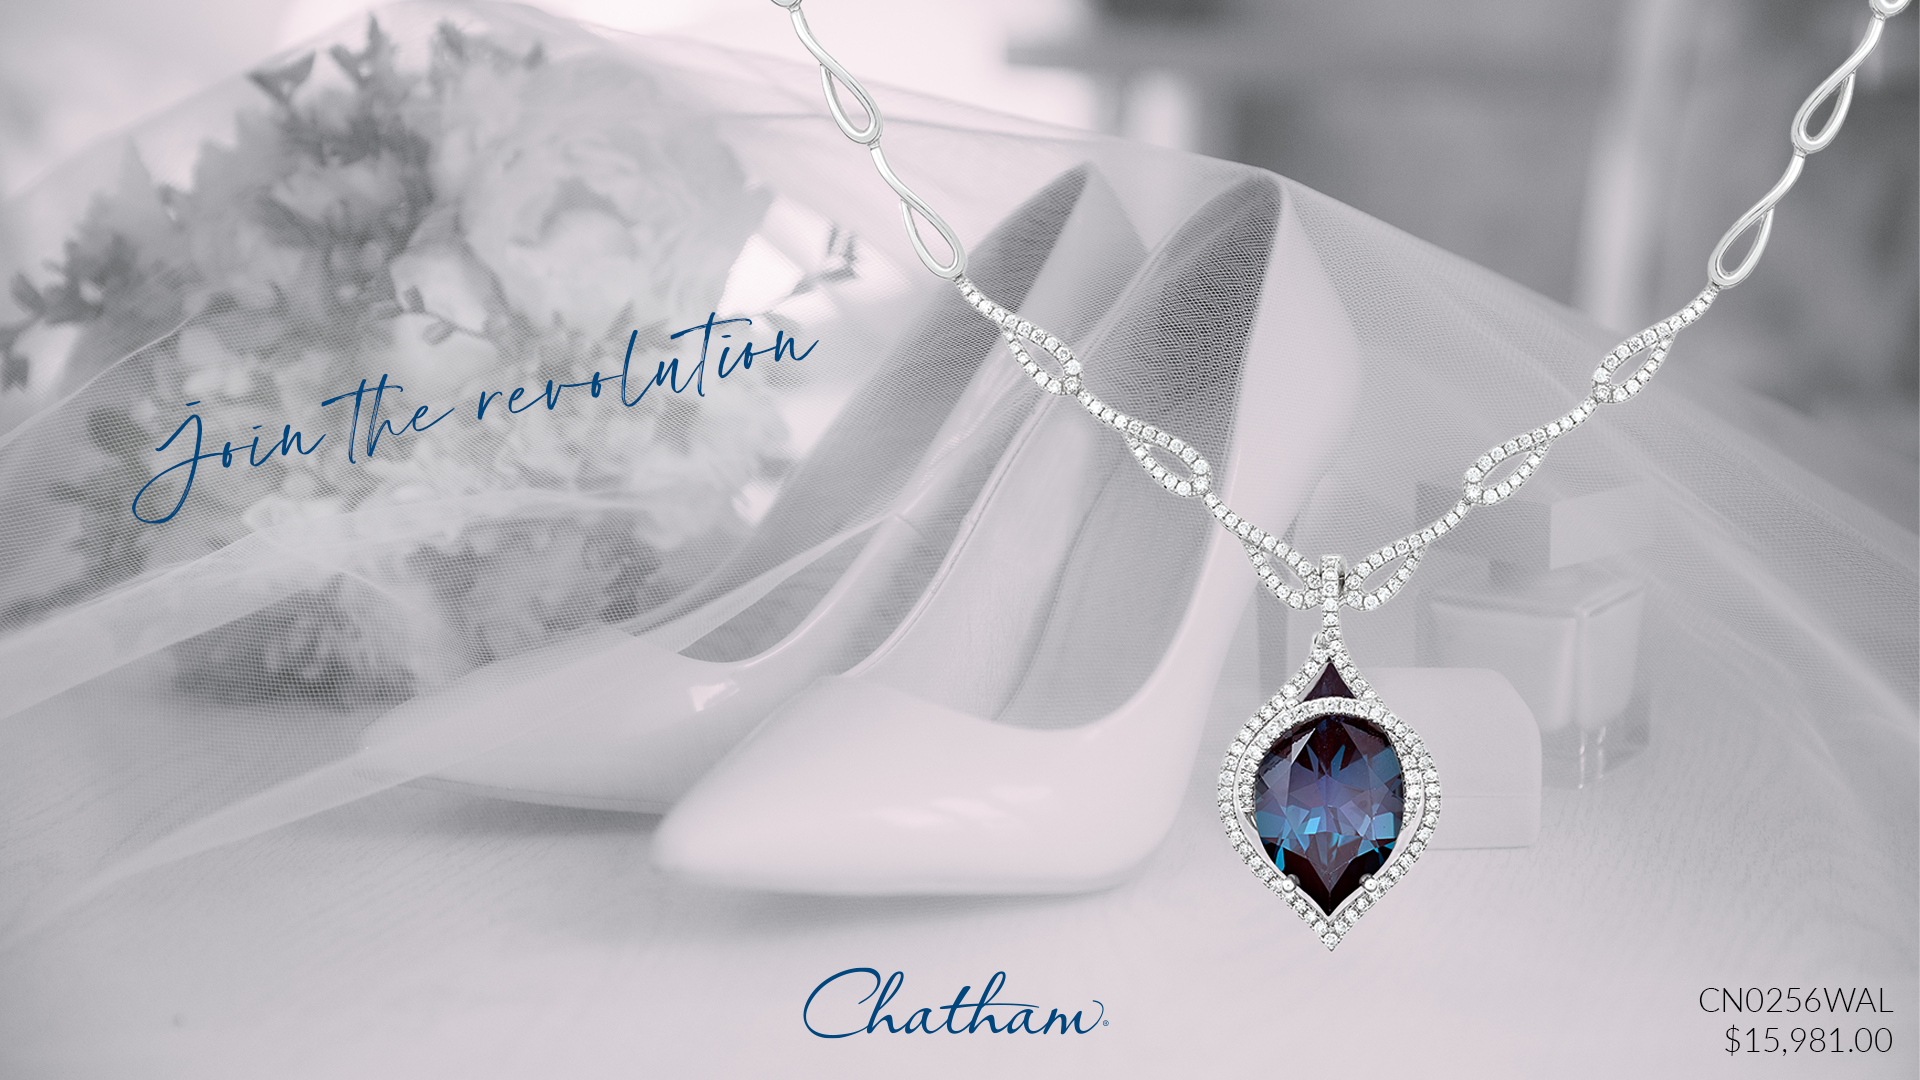 Join the Revolution
Alexandrite Necklace CN0256WAL
$15,981.00